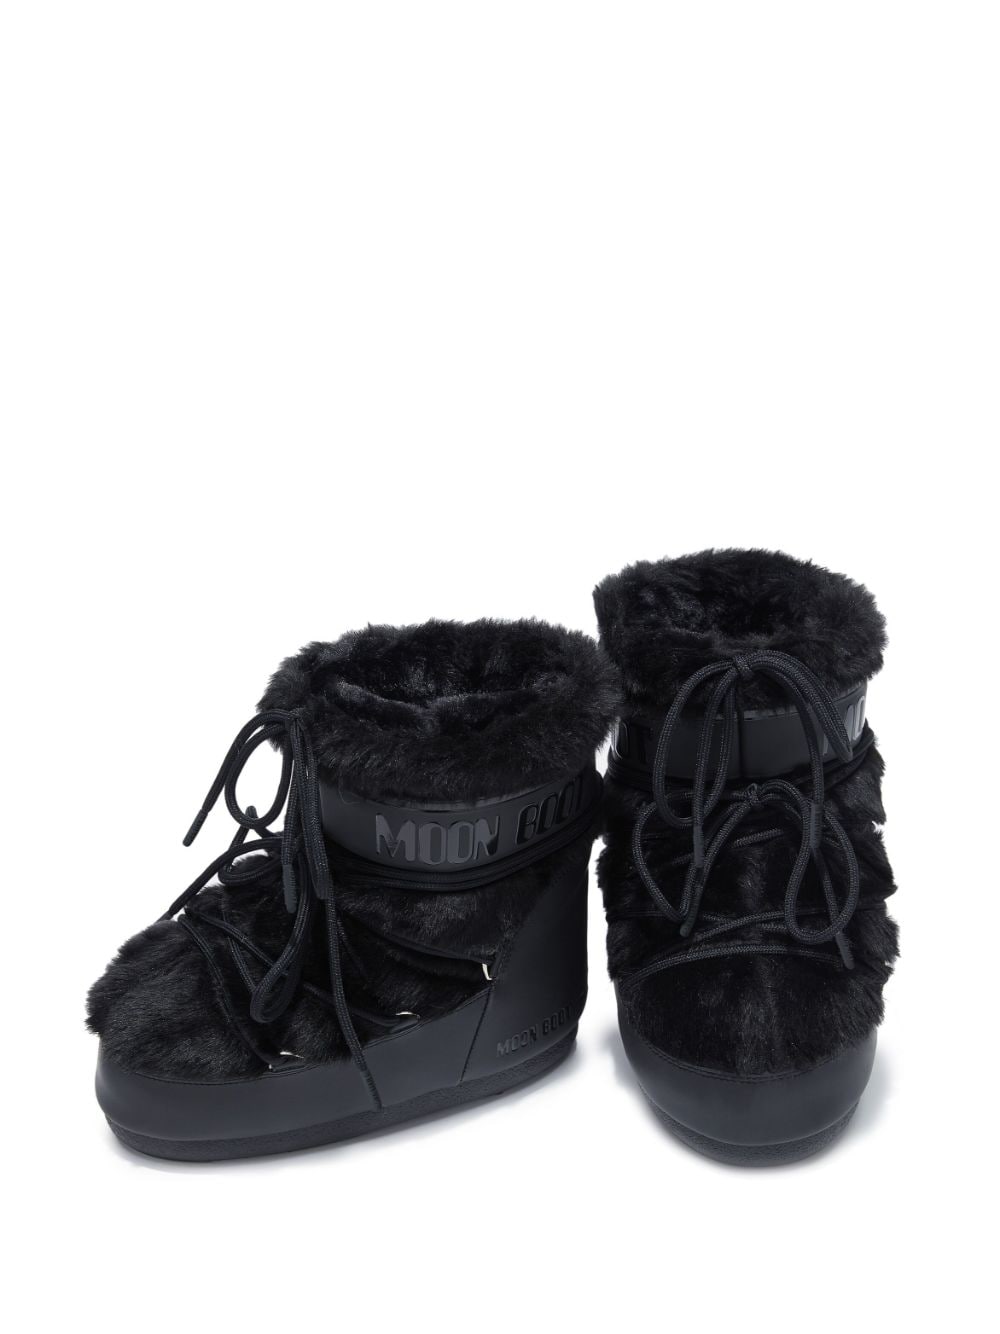 Moon Boot - Icon Faux-Fur Snow Boots - Womens - White